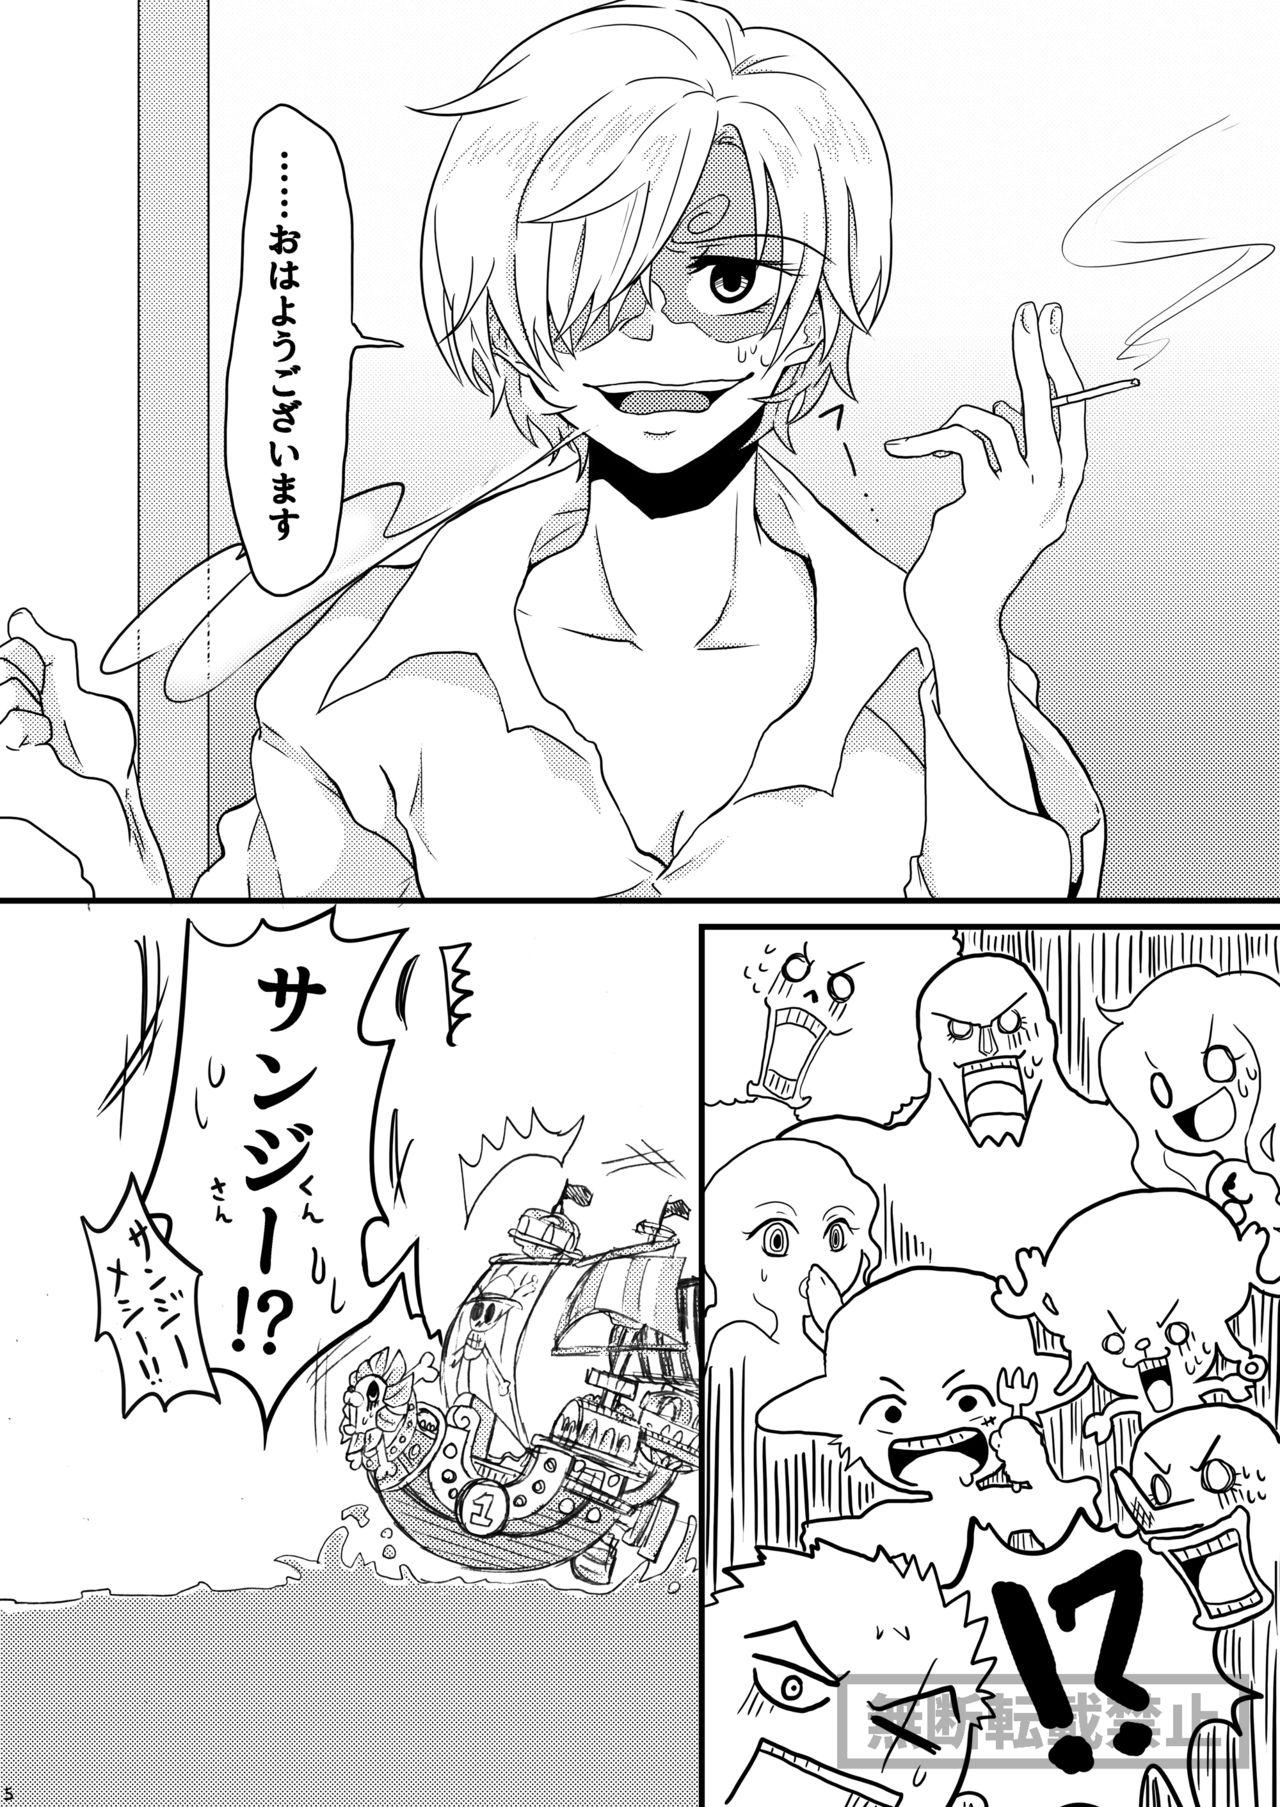 Hardon limited full course - One piece Blonde - Page 5